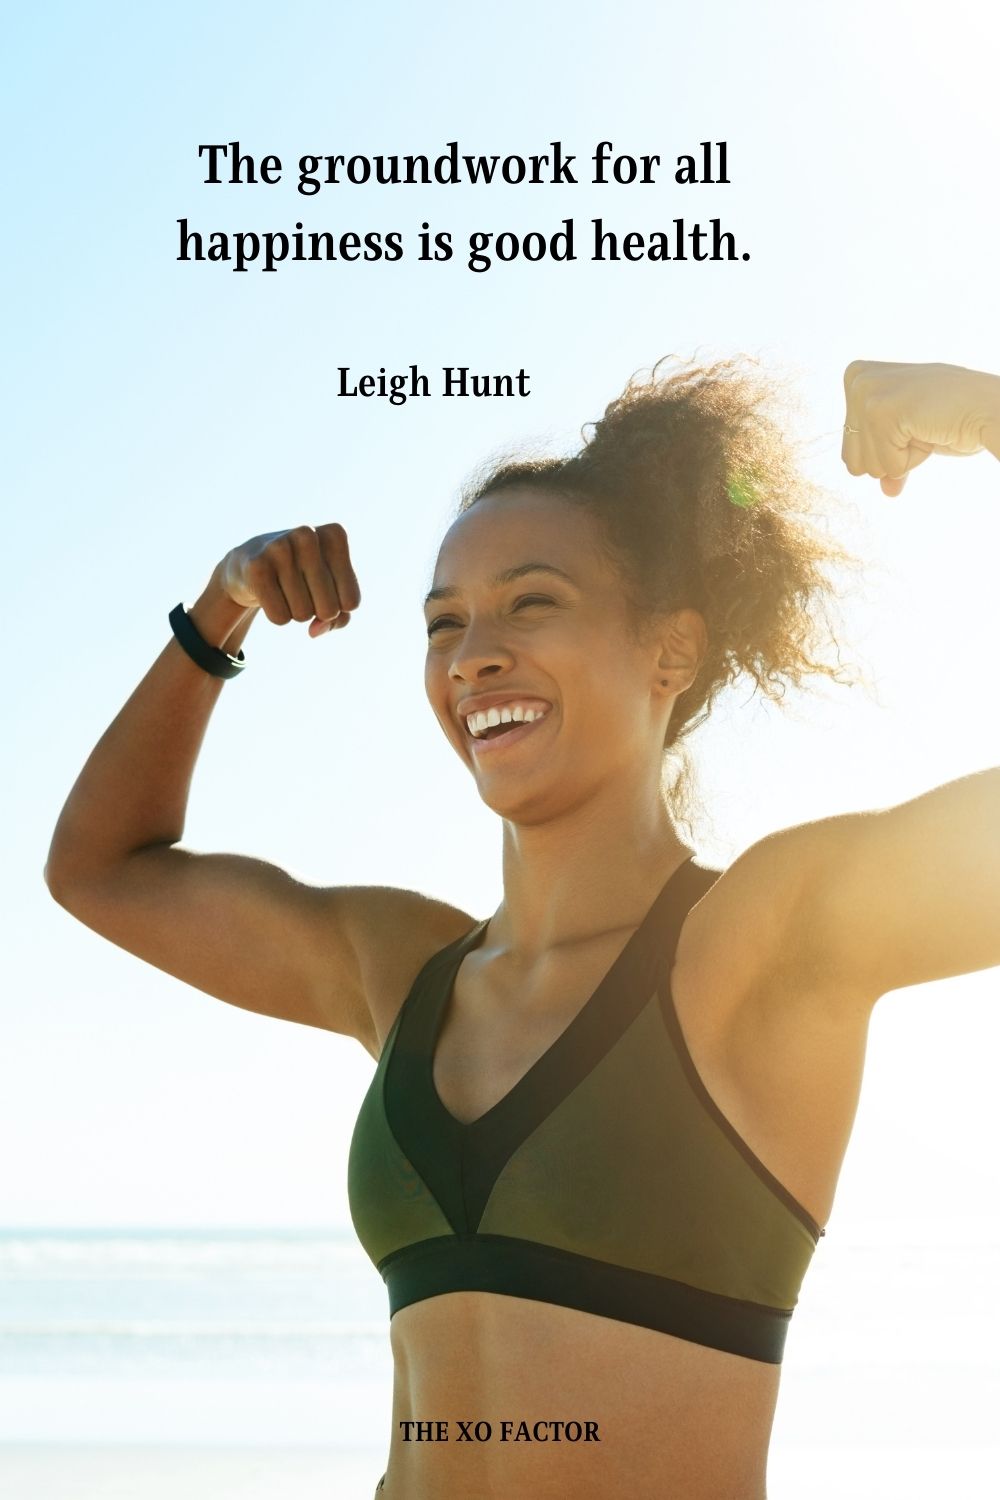 The groundwork for all happiness is good health. Leigh Hunt